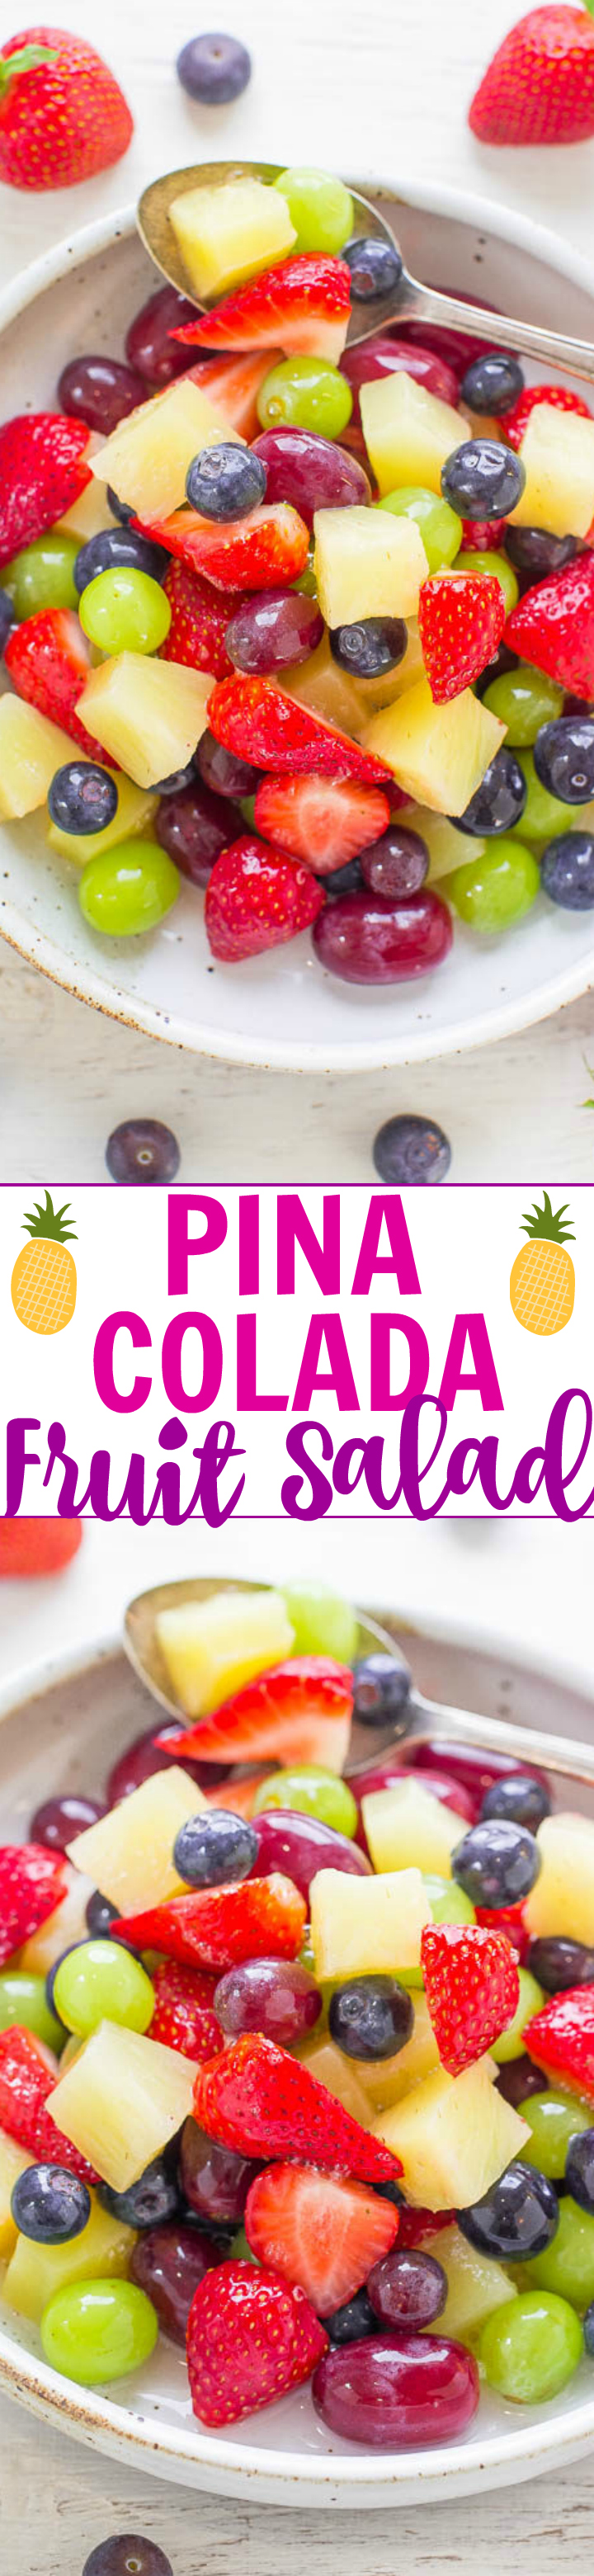 Tropical Fruit Salad — This tropical fruit salad features fresh fruit that’s tossed in pineapple juice, coconut and almond extracts, and piña colada mix. Don't worry, this easy fruit salad is non-alcoholic! 